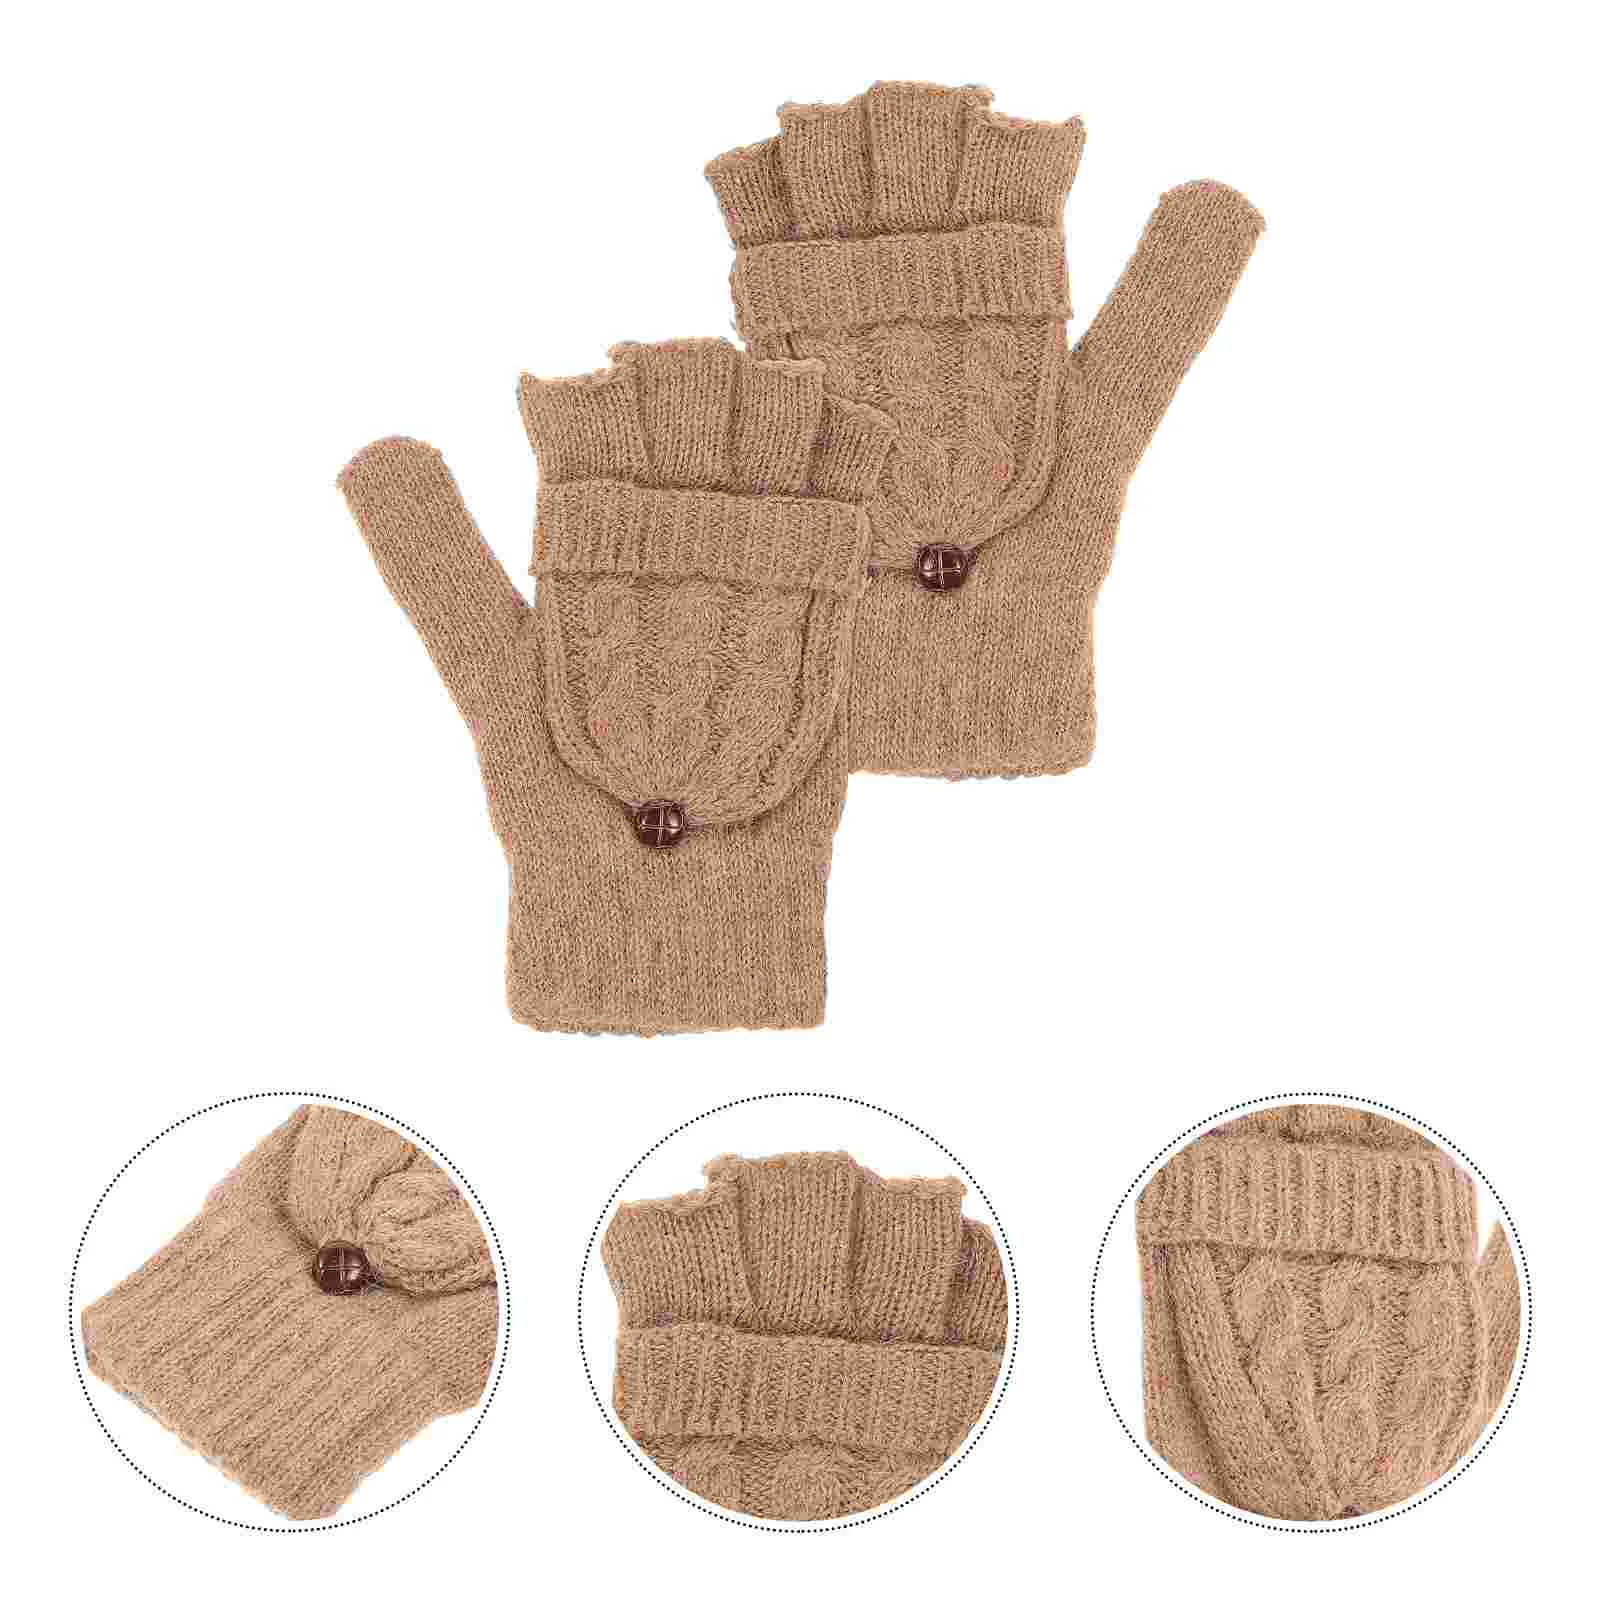 

Brown Knitted Winter Warm Convertible Winter Warm Convertible Warm Thermal Fingerless for Hiking Driving